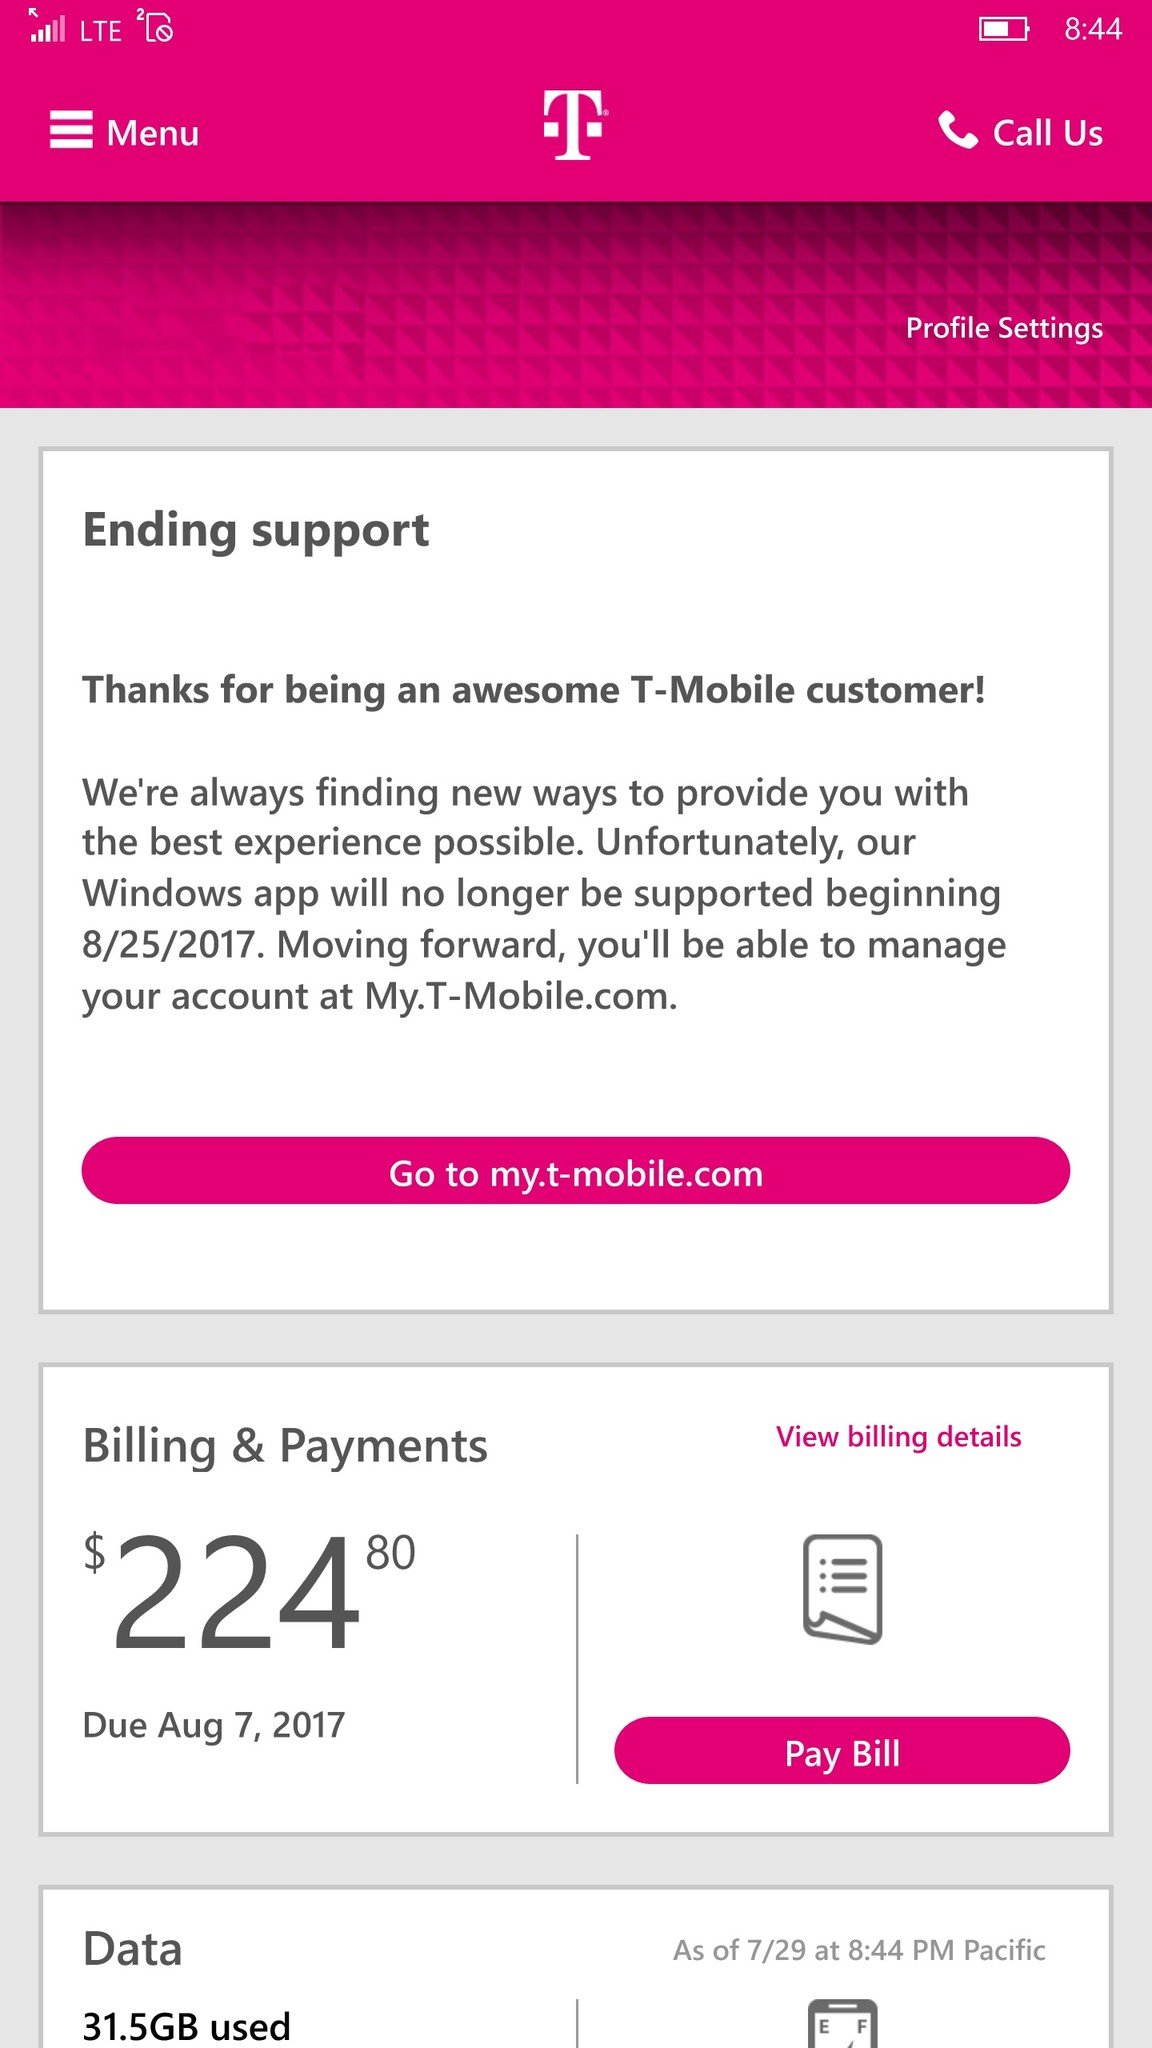 T-Mobile retiring its app for Window phones on August 25